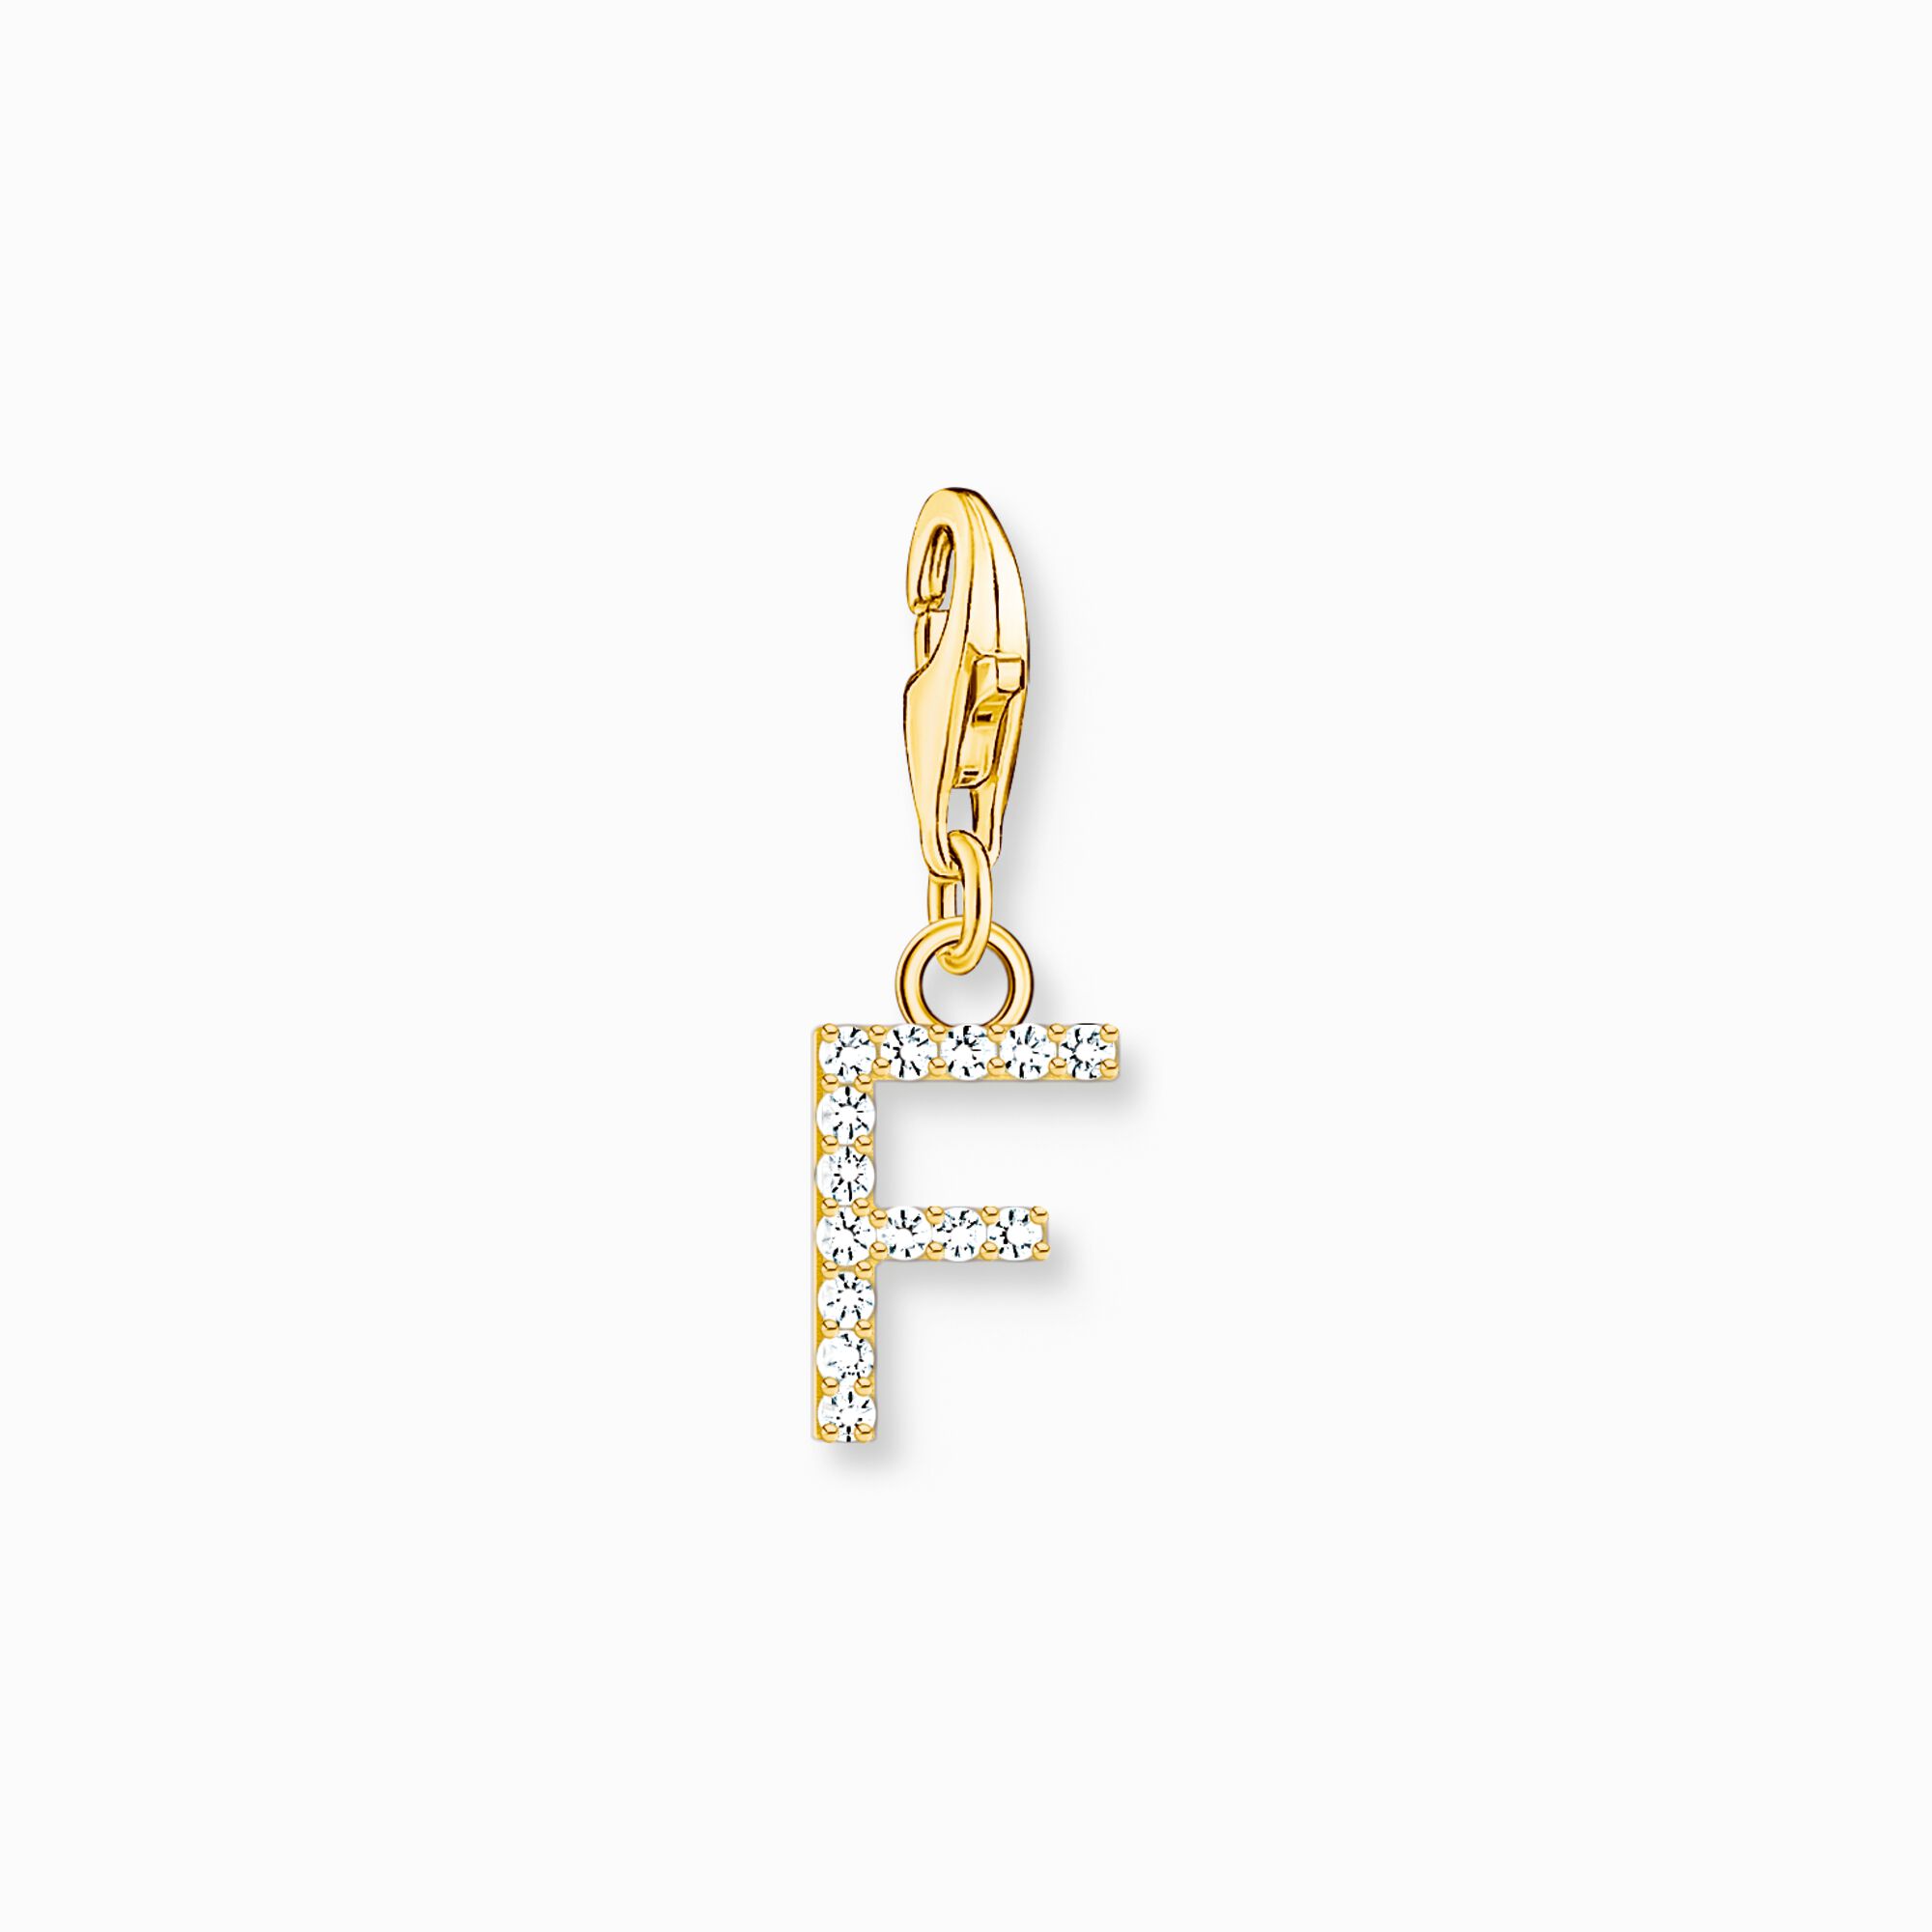 Charm pendant letter F with white stones gold plated from the Charm Club collection in the THOMAS SABO online store